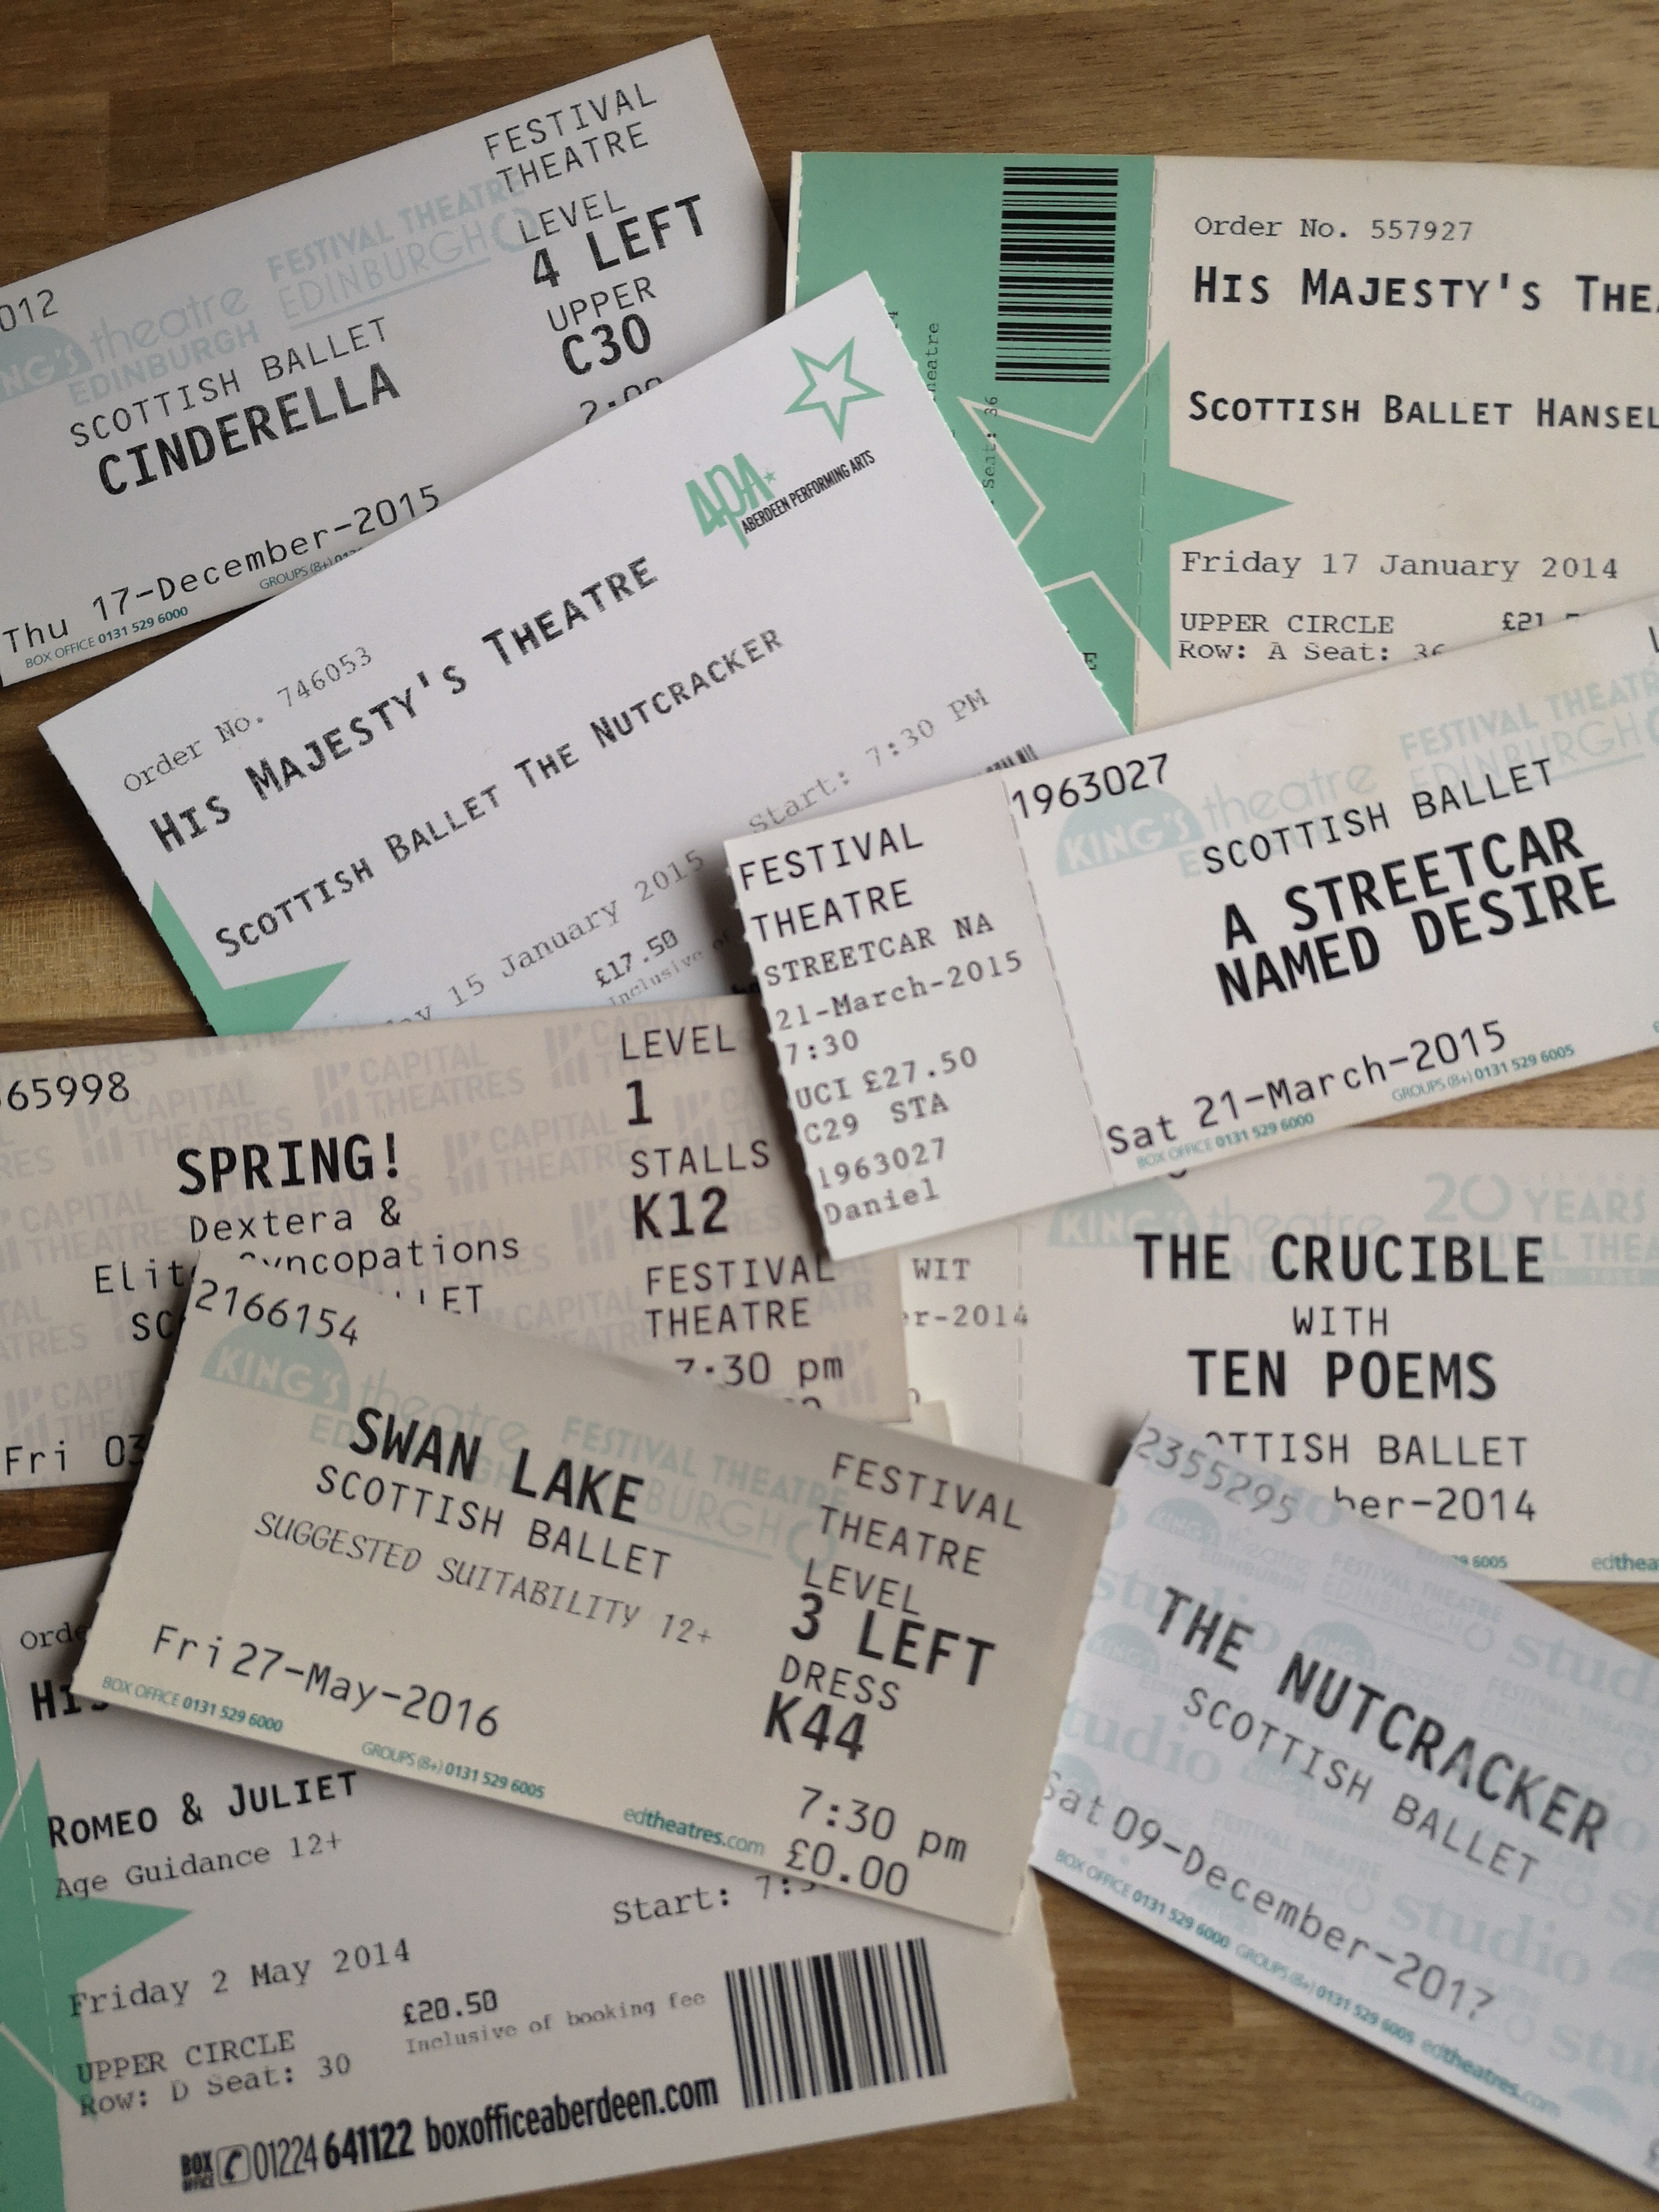 Many tickets for Scottish Ballet performances